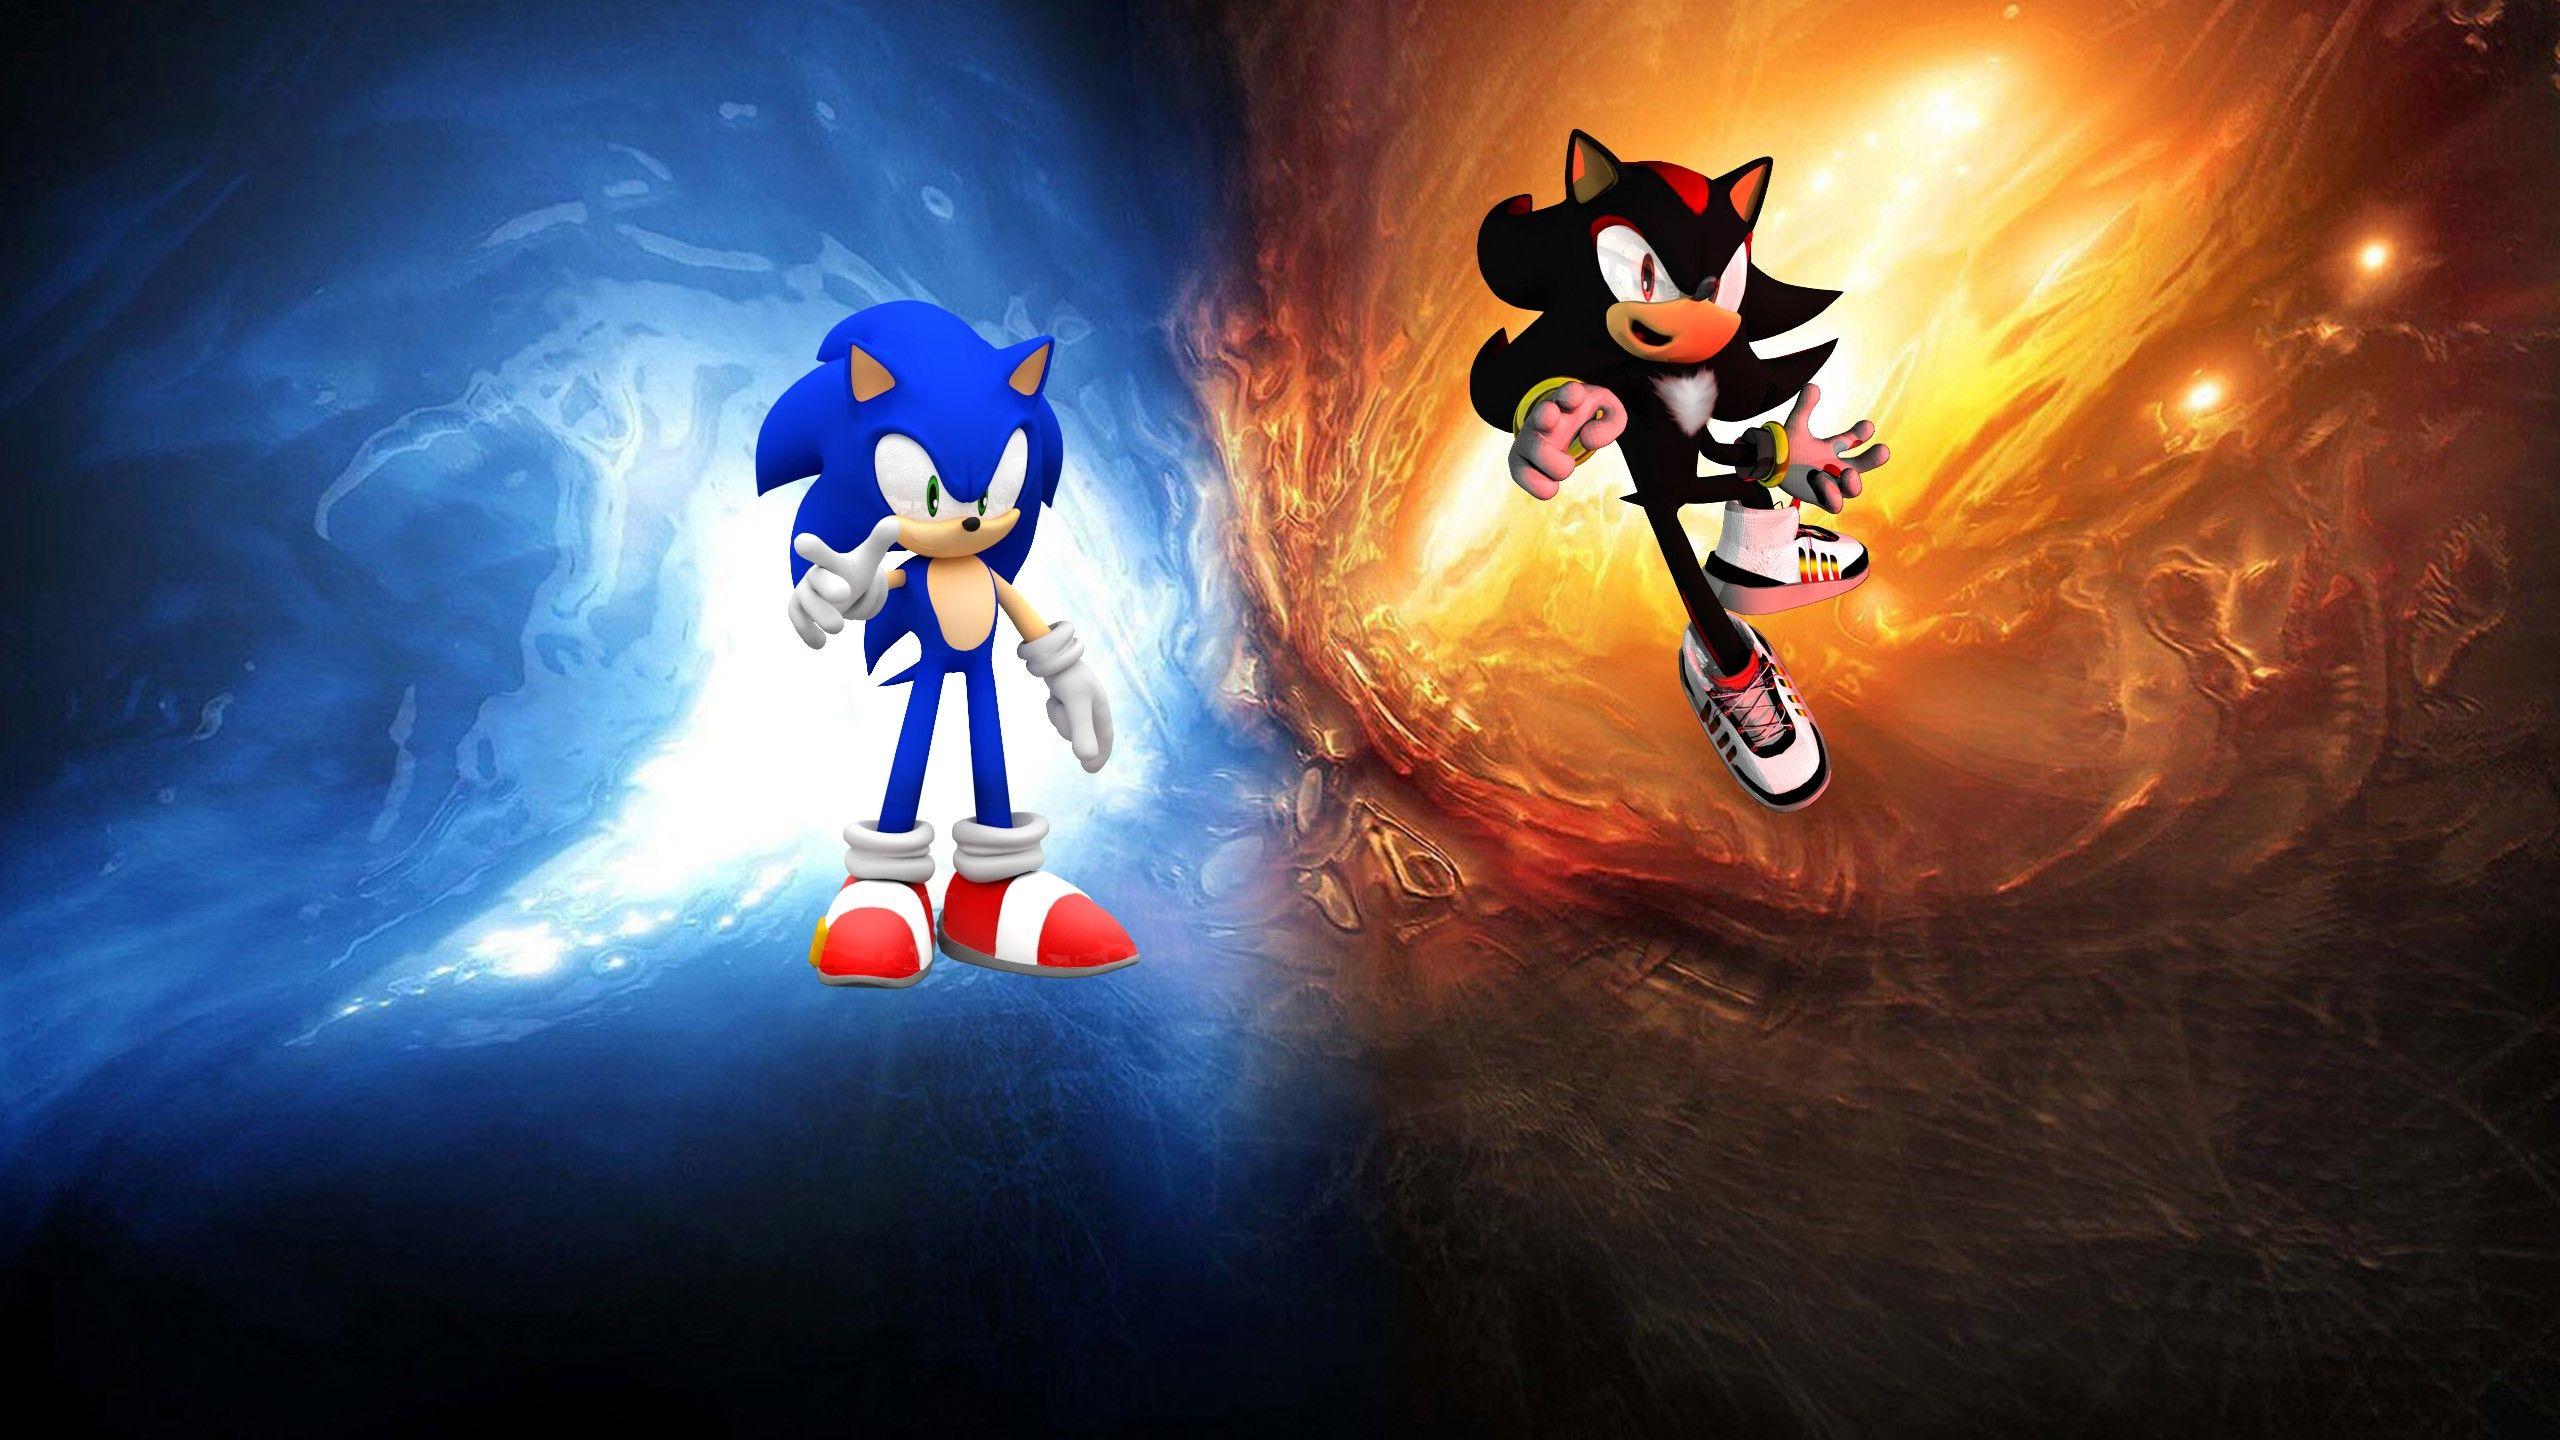 Download Sonic Shadow Wallpapers Widescreen 2560x1440 px.